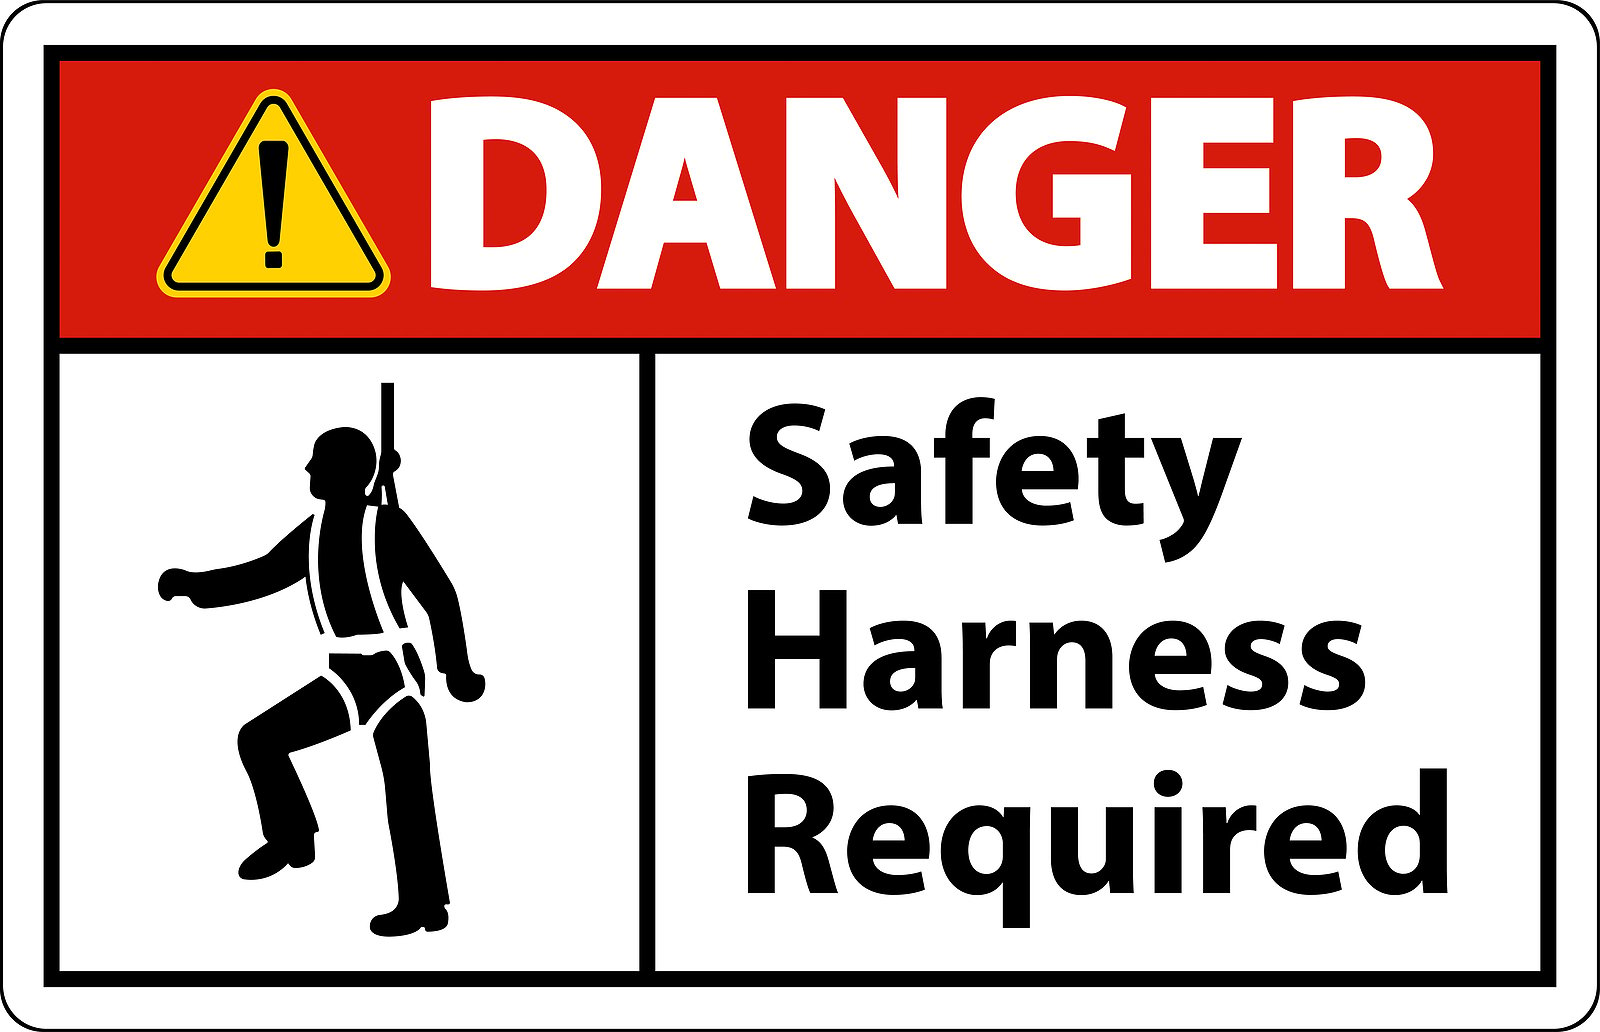 bigstock-Danger-Safety-Harness-Required-465929977